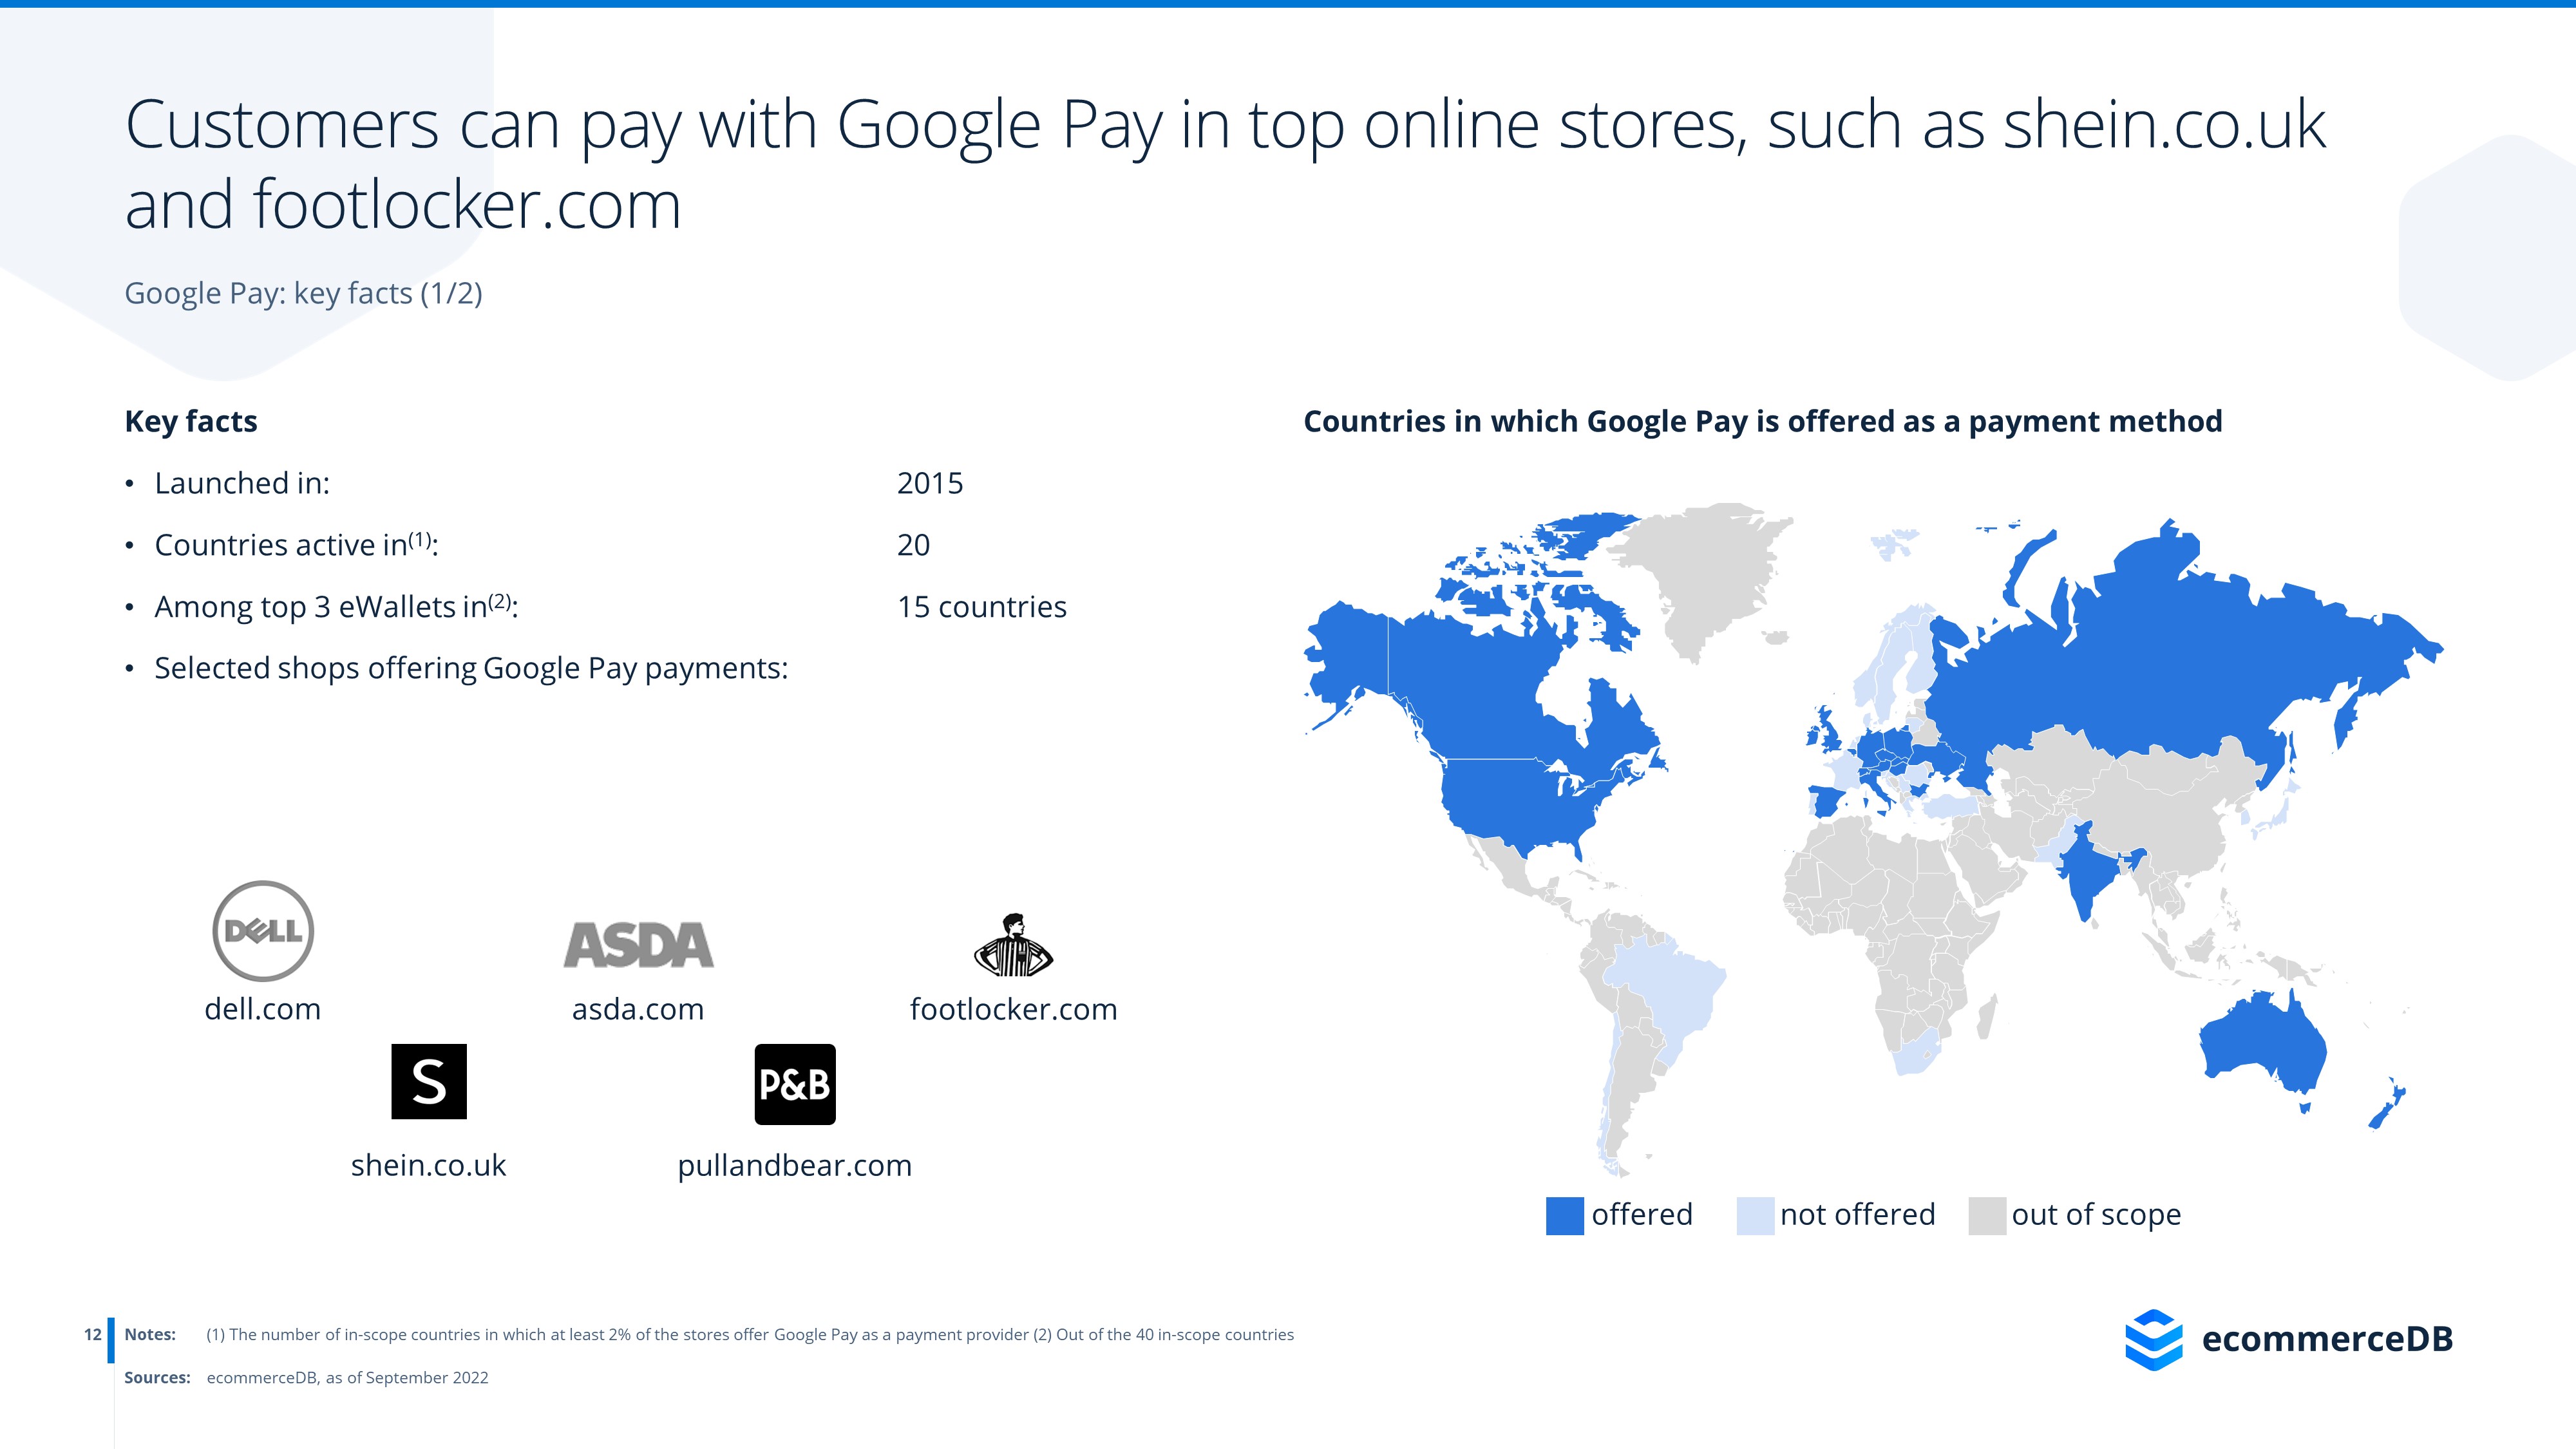 ecommerceDB Infographic: Payment Providers_Google Pay_2022_2.jpg